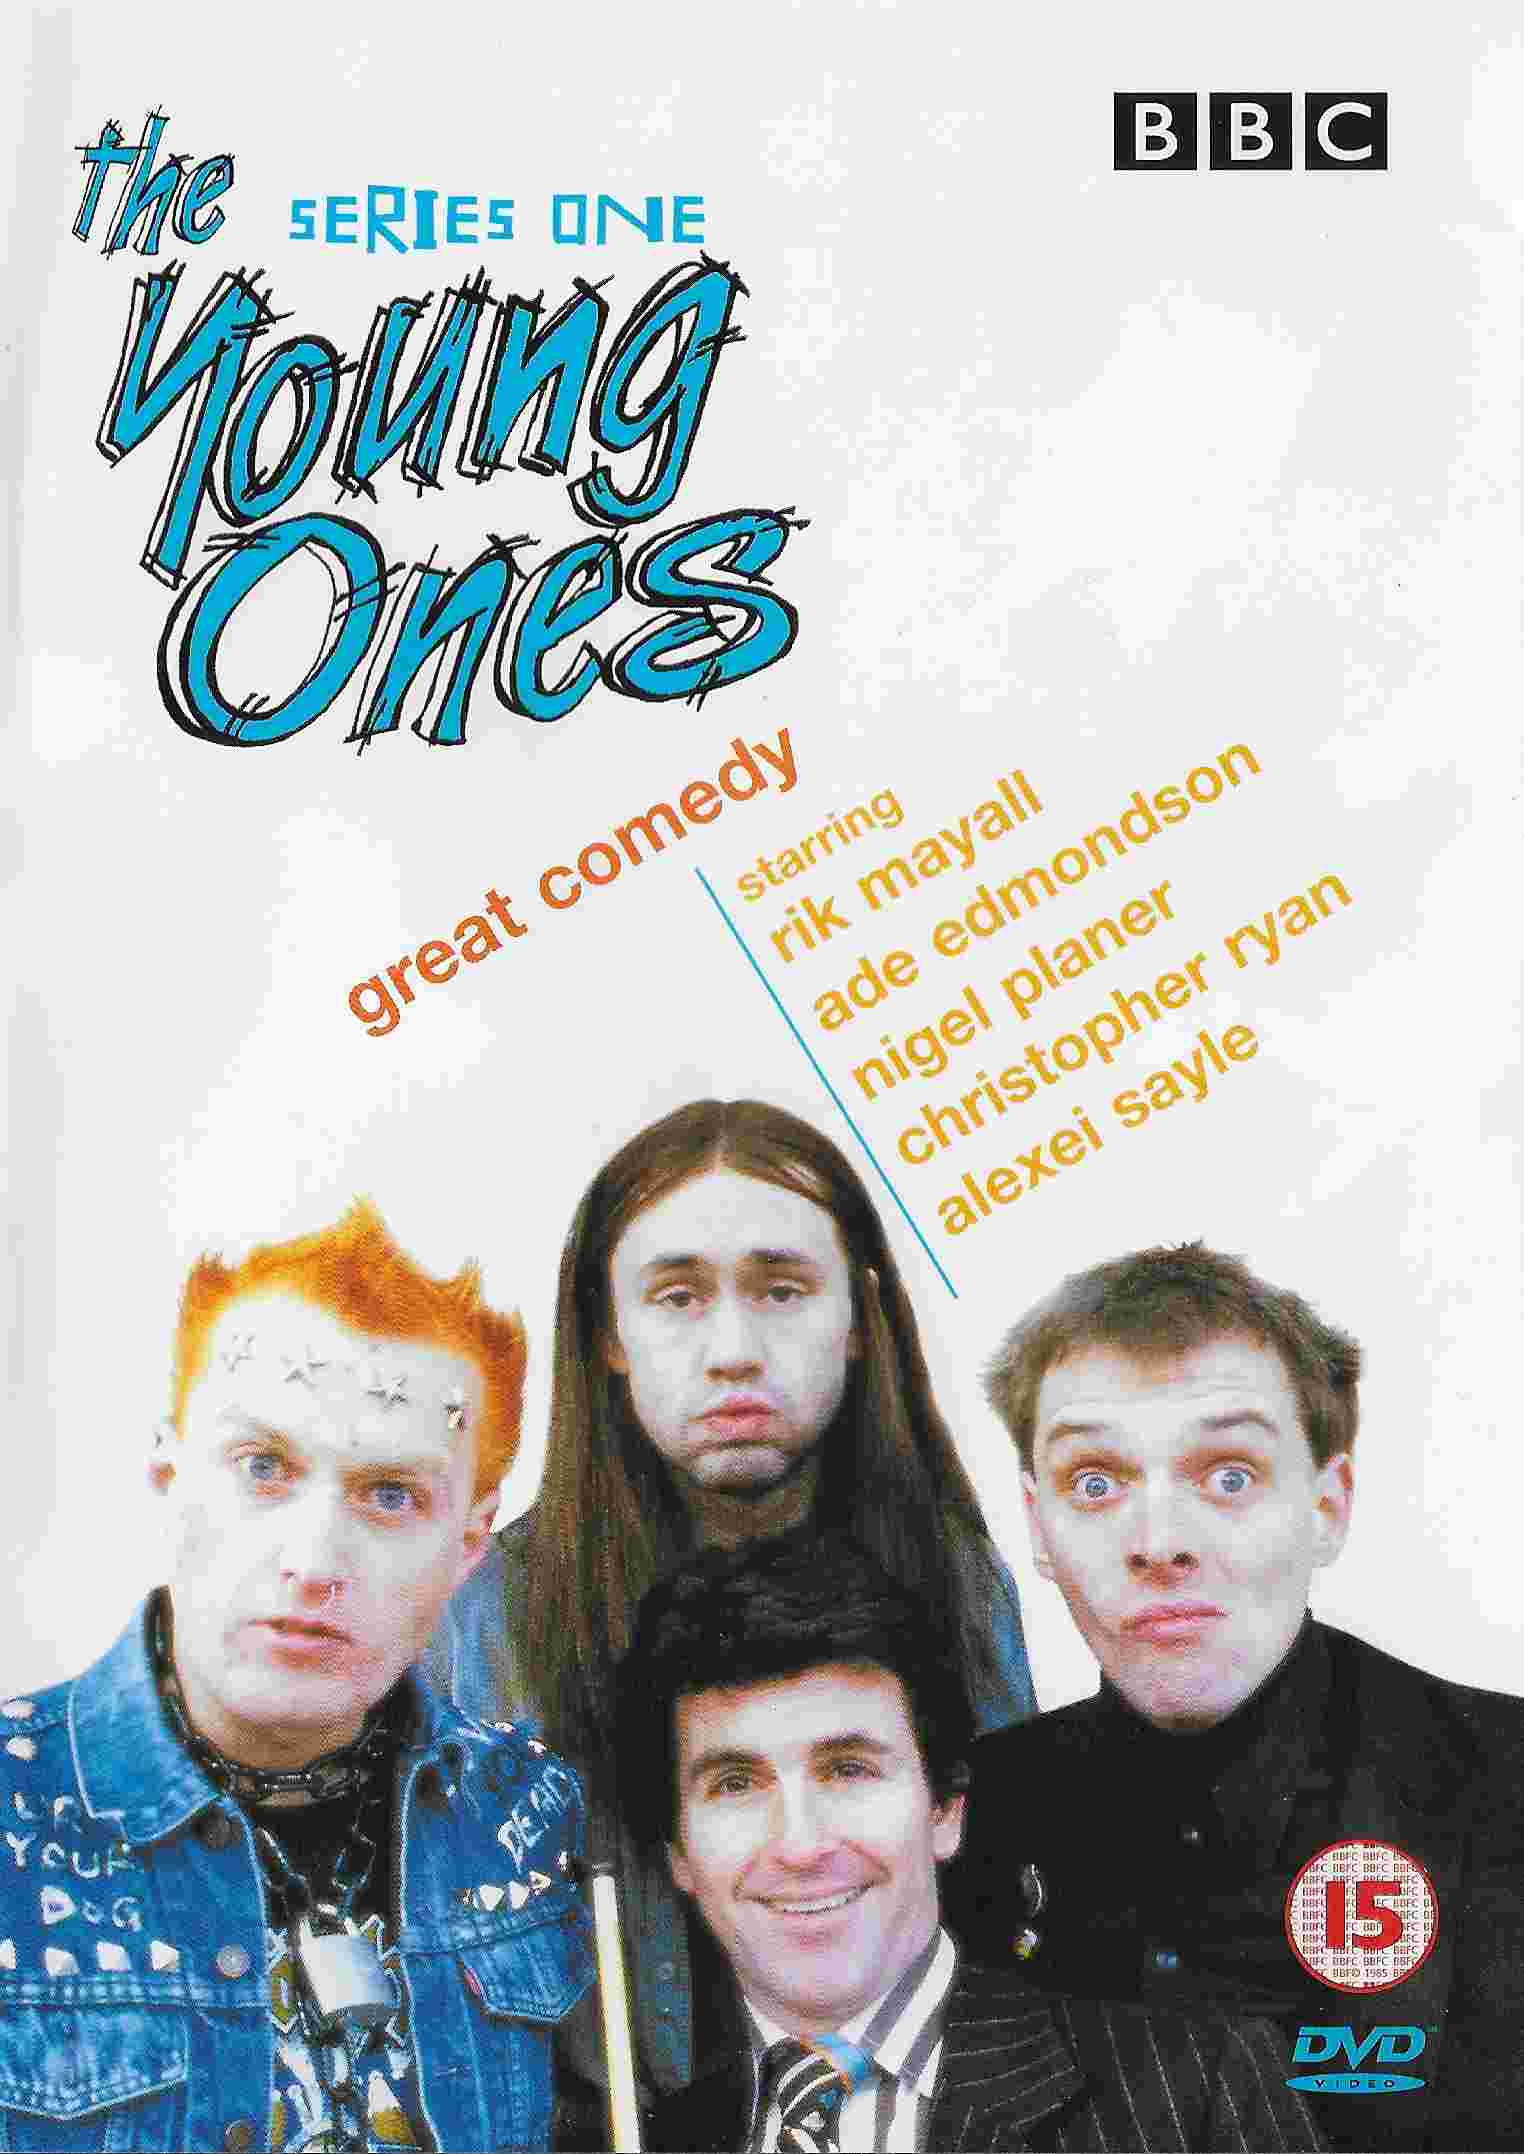 Picture of BBCDVD 1136 The young ones - Series 1 by artist Ben Elton / Rik Mayall / Lise Mayer / Alexei Sayle